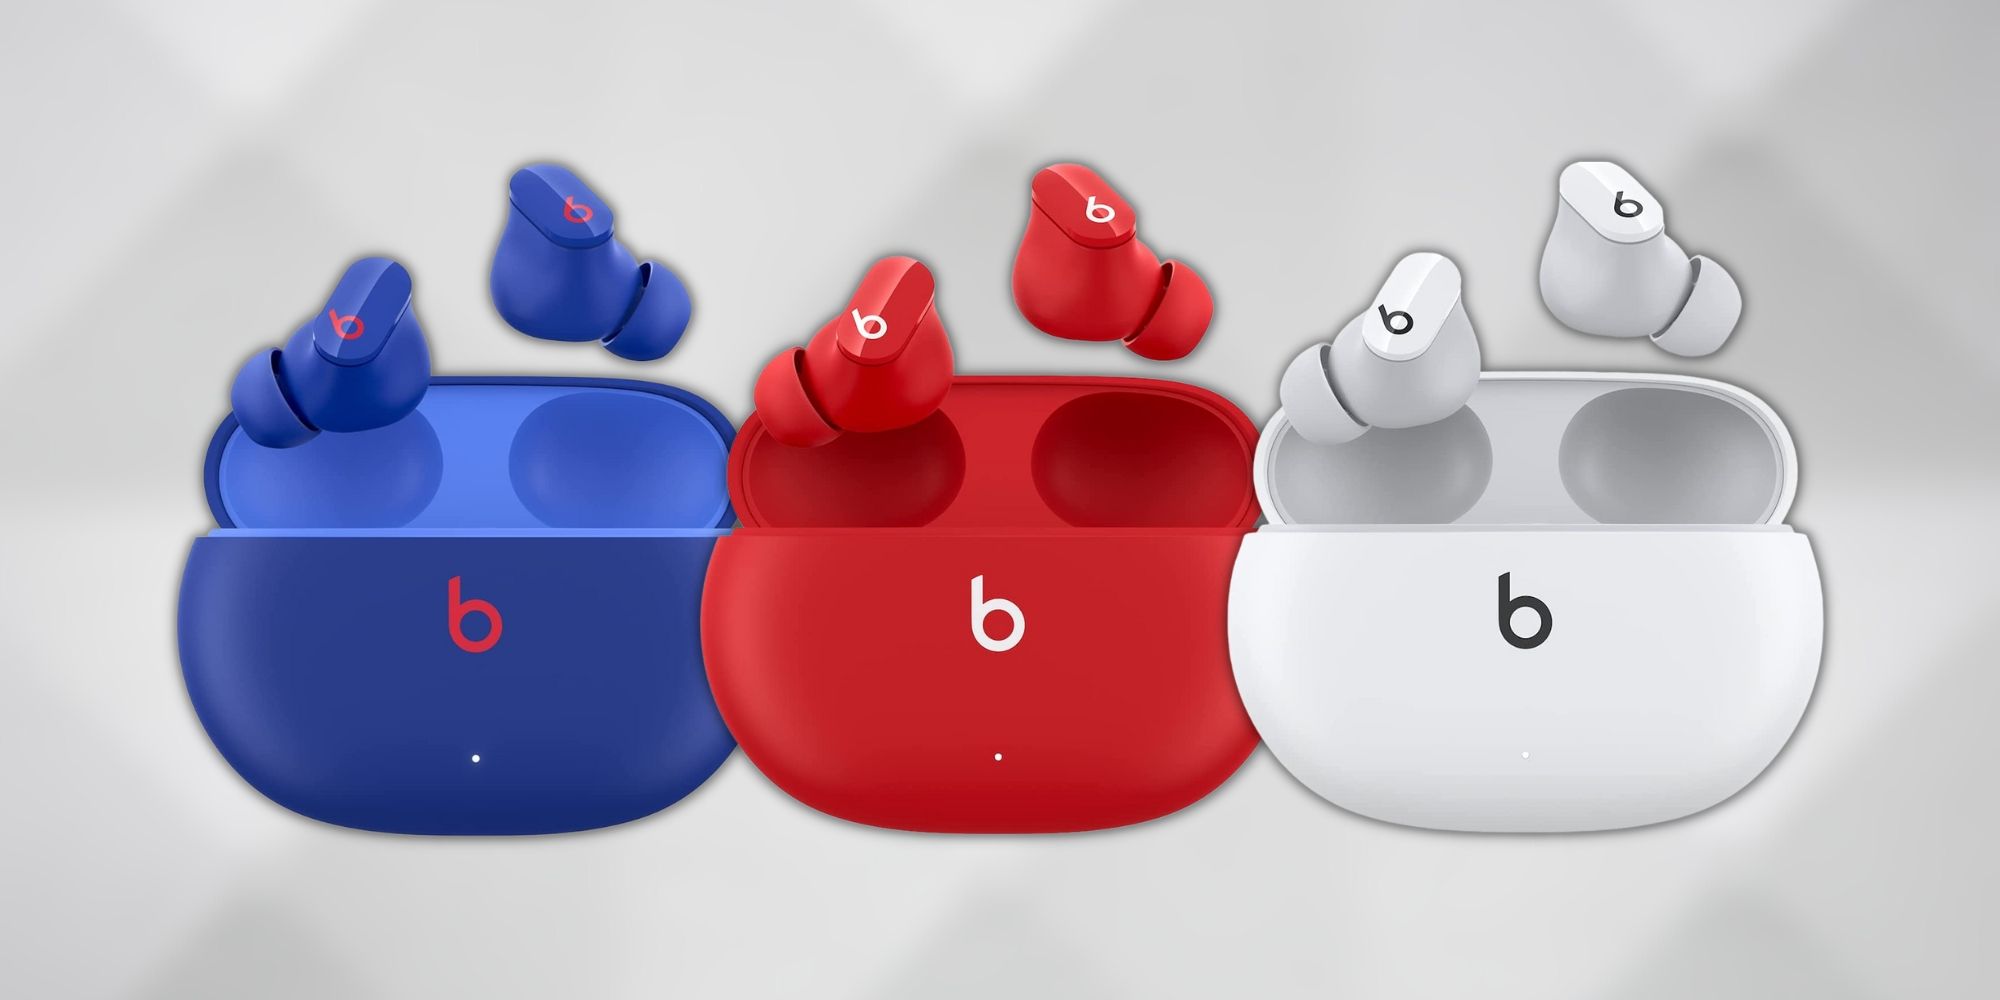 Image of the Beats Studio Buds in three colors including blue, red, and white